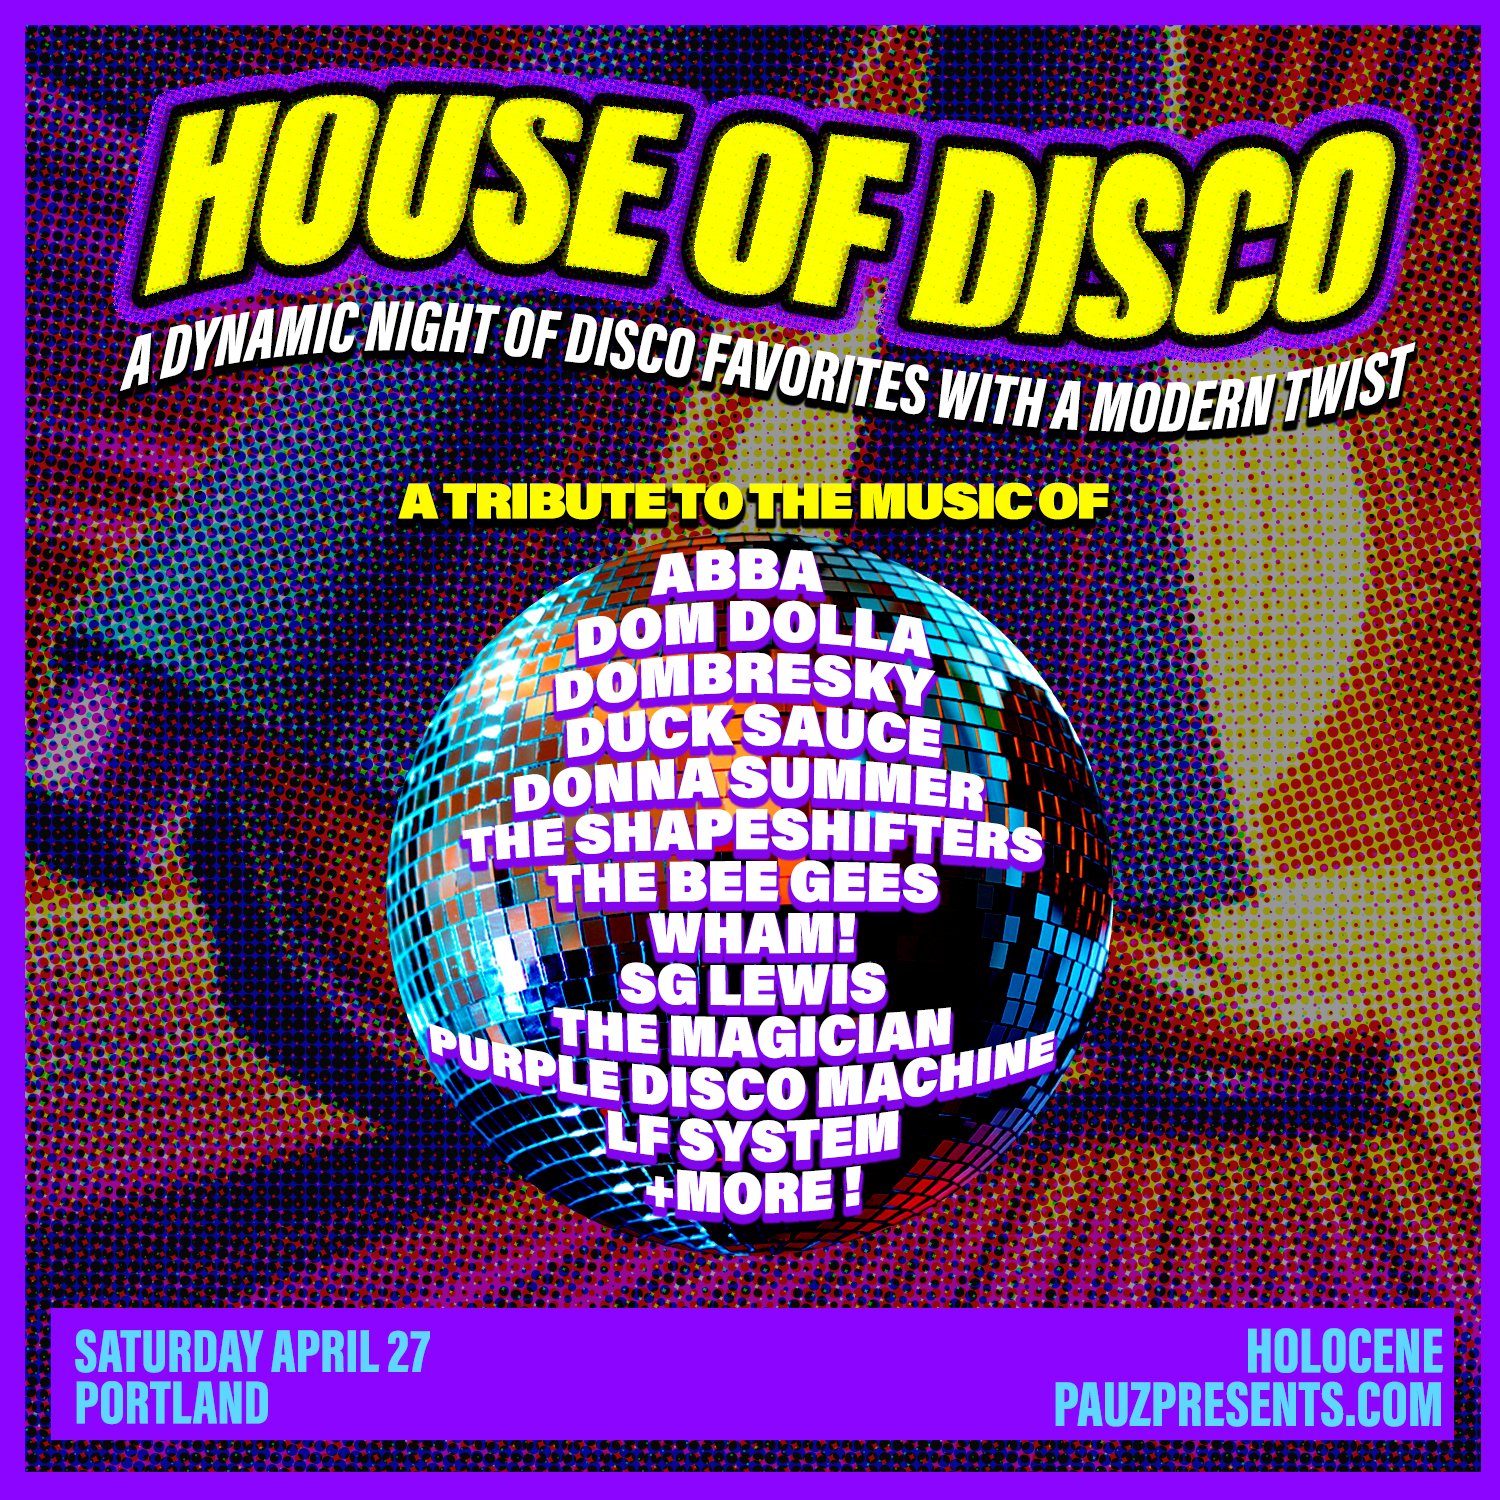 HOUSE OF DISCO - A Night of Classic Disco & Modern House Anthems - Página frontal